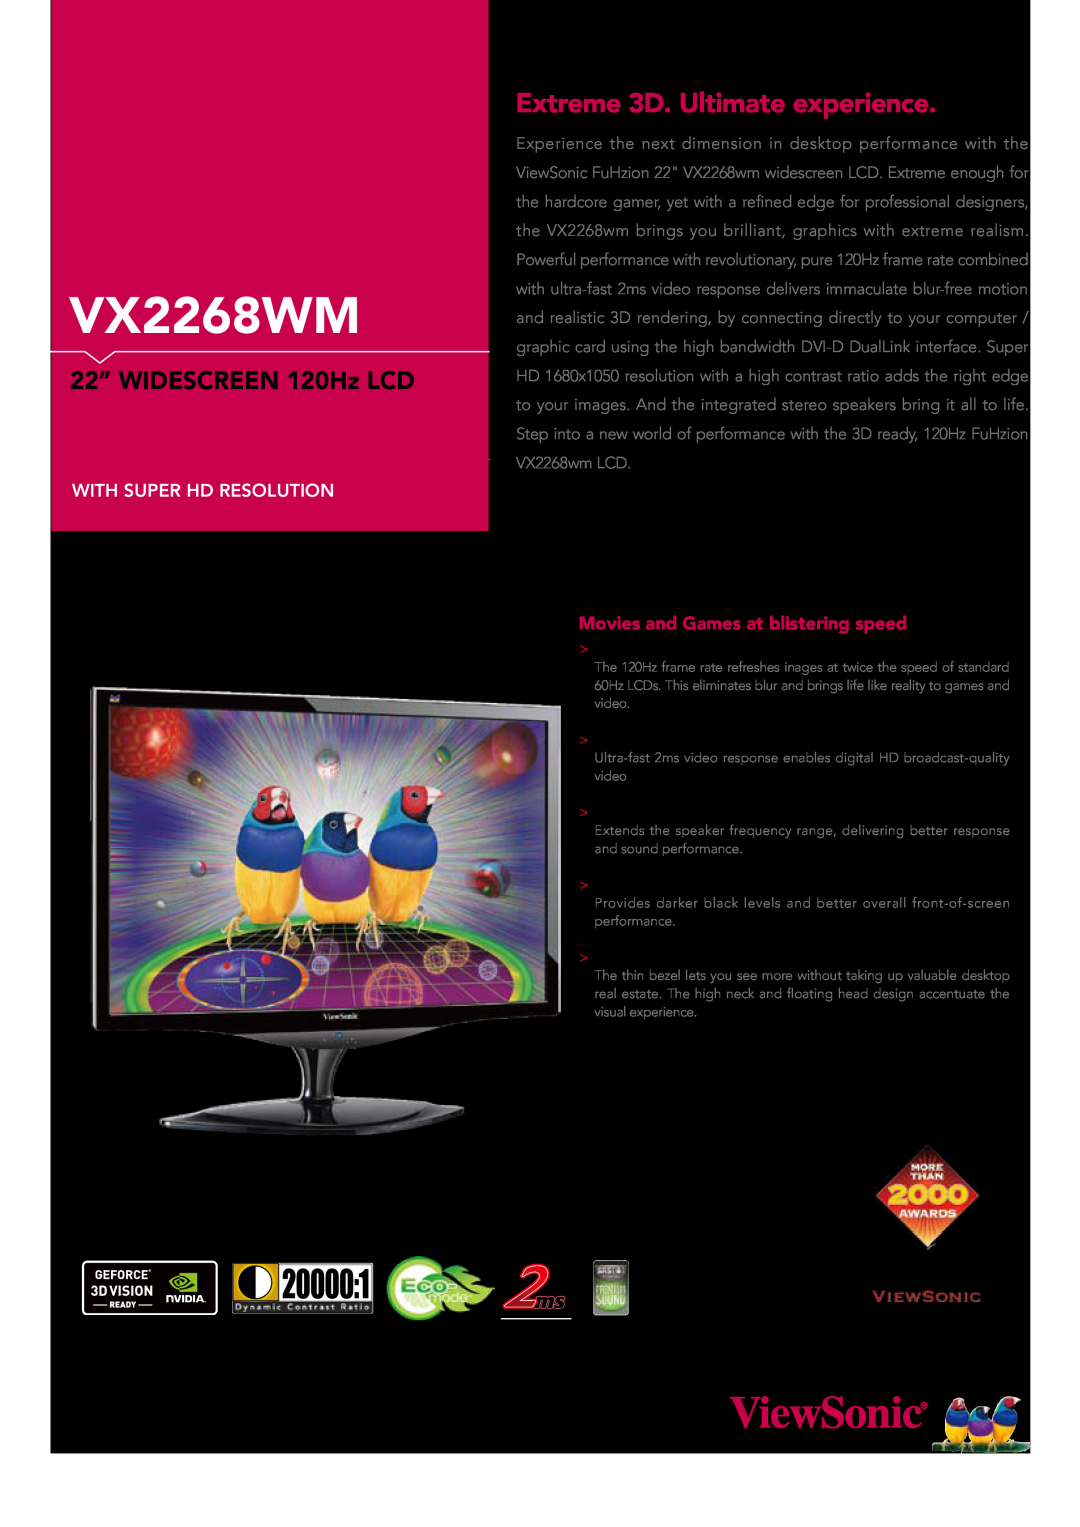 ViewSonic VX2268WM manual Extreme 3D. Ultimate experience, 22” WIDESCREEN 120Hz LCD, See the difference TM 